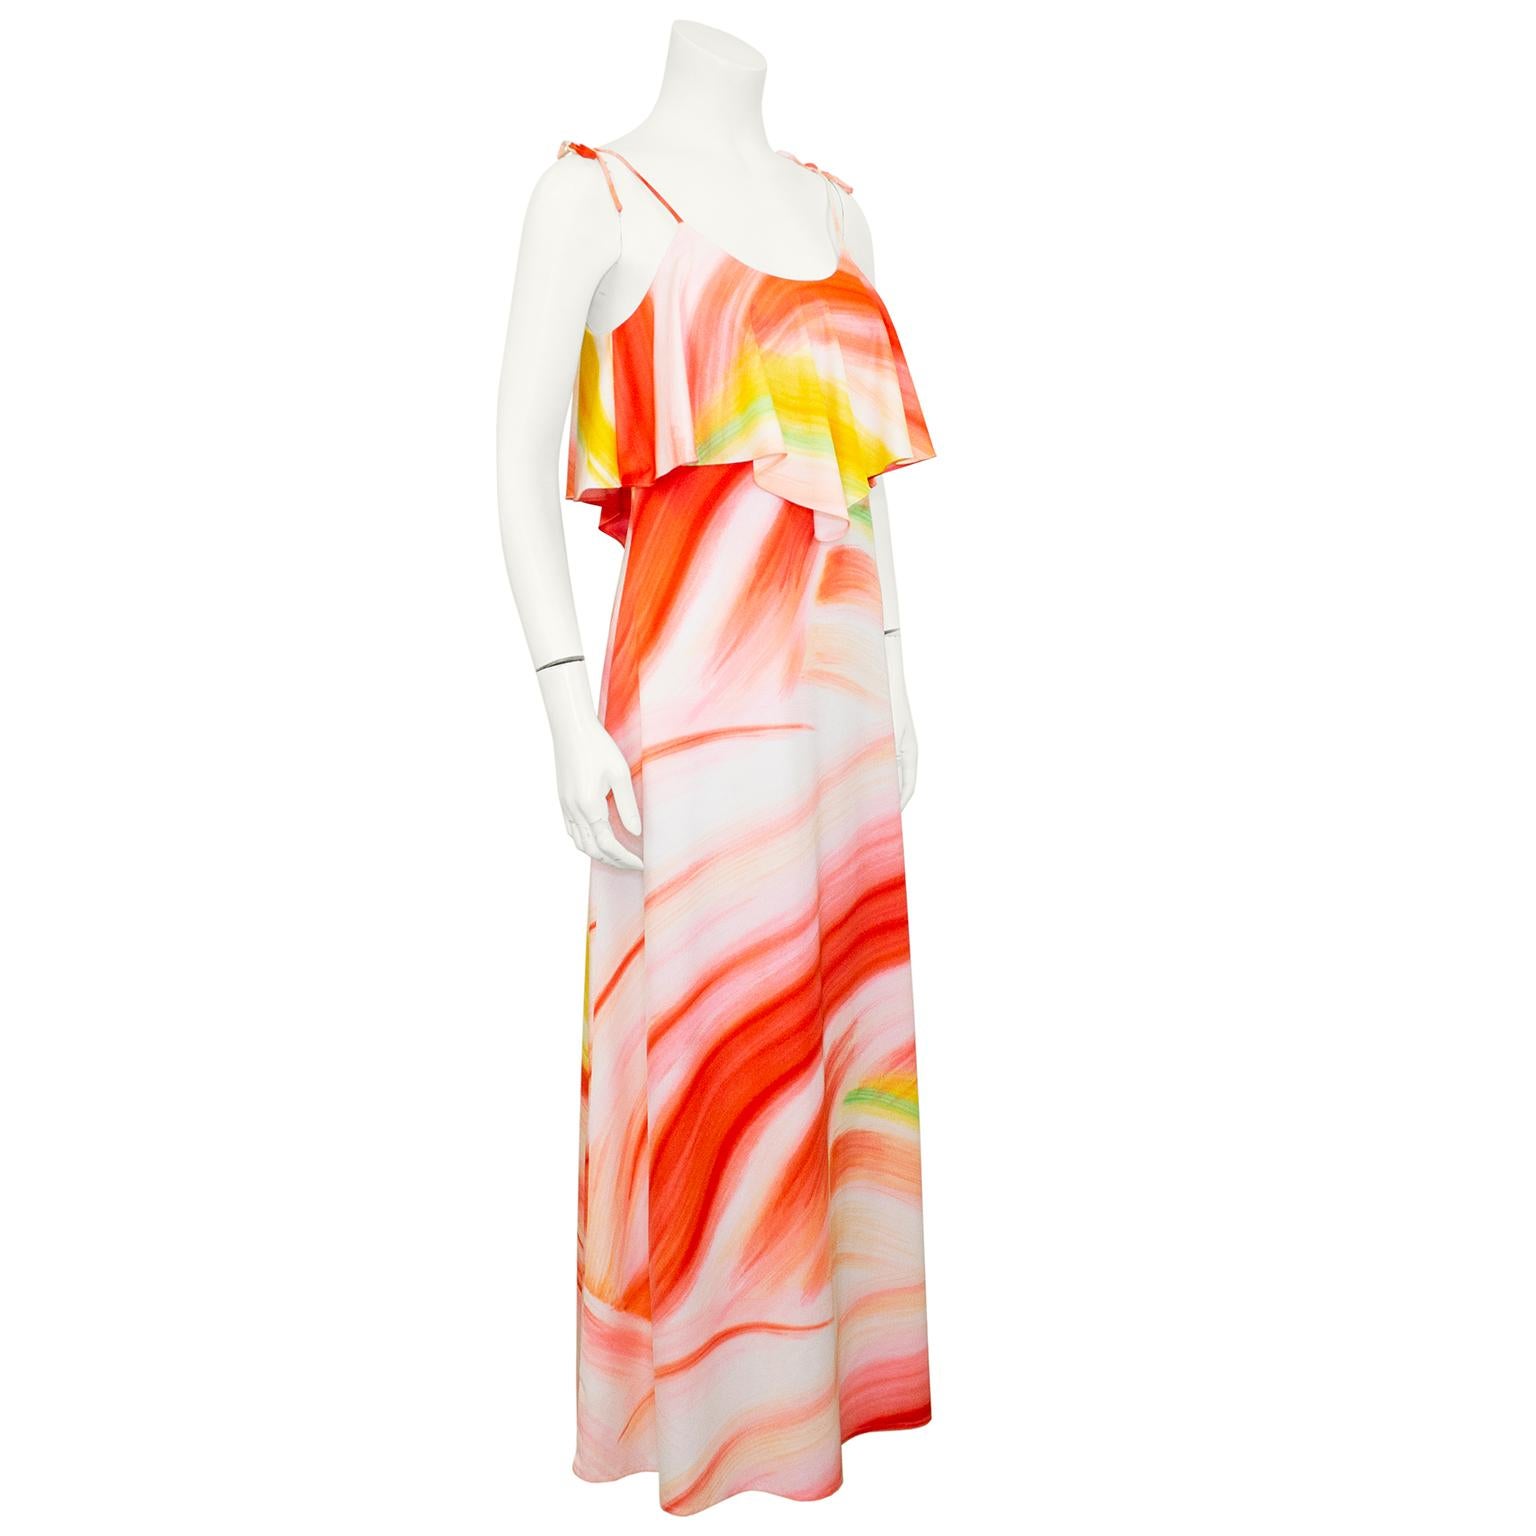 Ursula of Switzerland poly jersey maxi dress from the 1970s featuring an orange, yellow and green abstract paint brush print. Scoop neckline with spaghetti straps that tie. Tiered hanky hem bust. Skirt hits the floor or just above depending on your